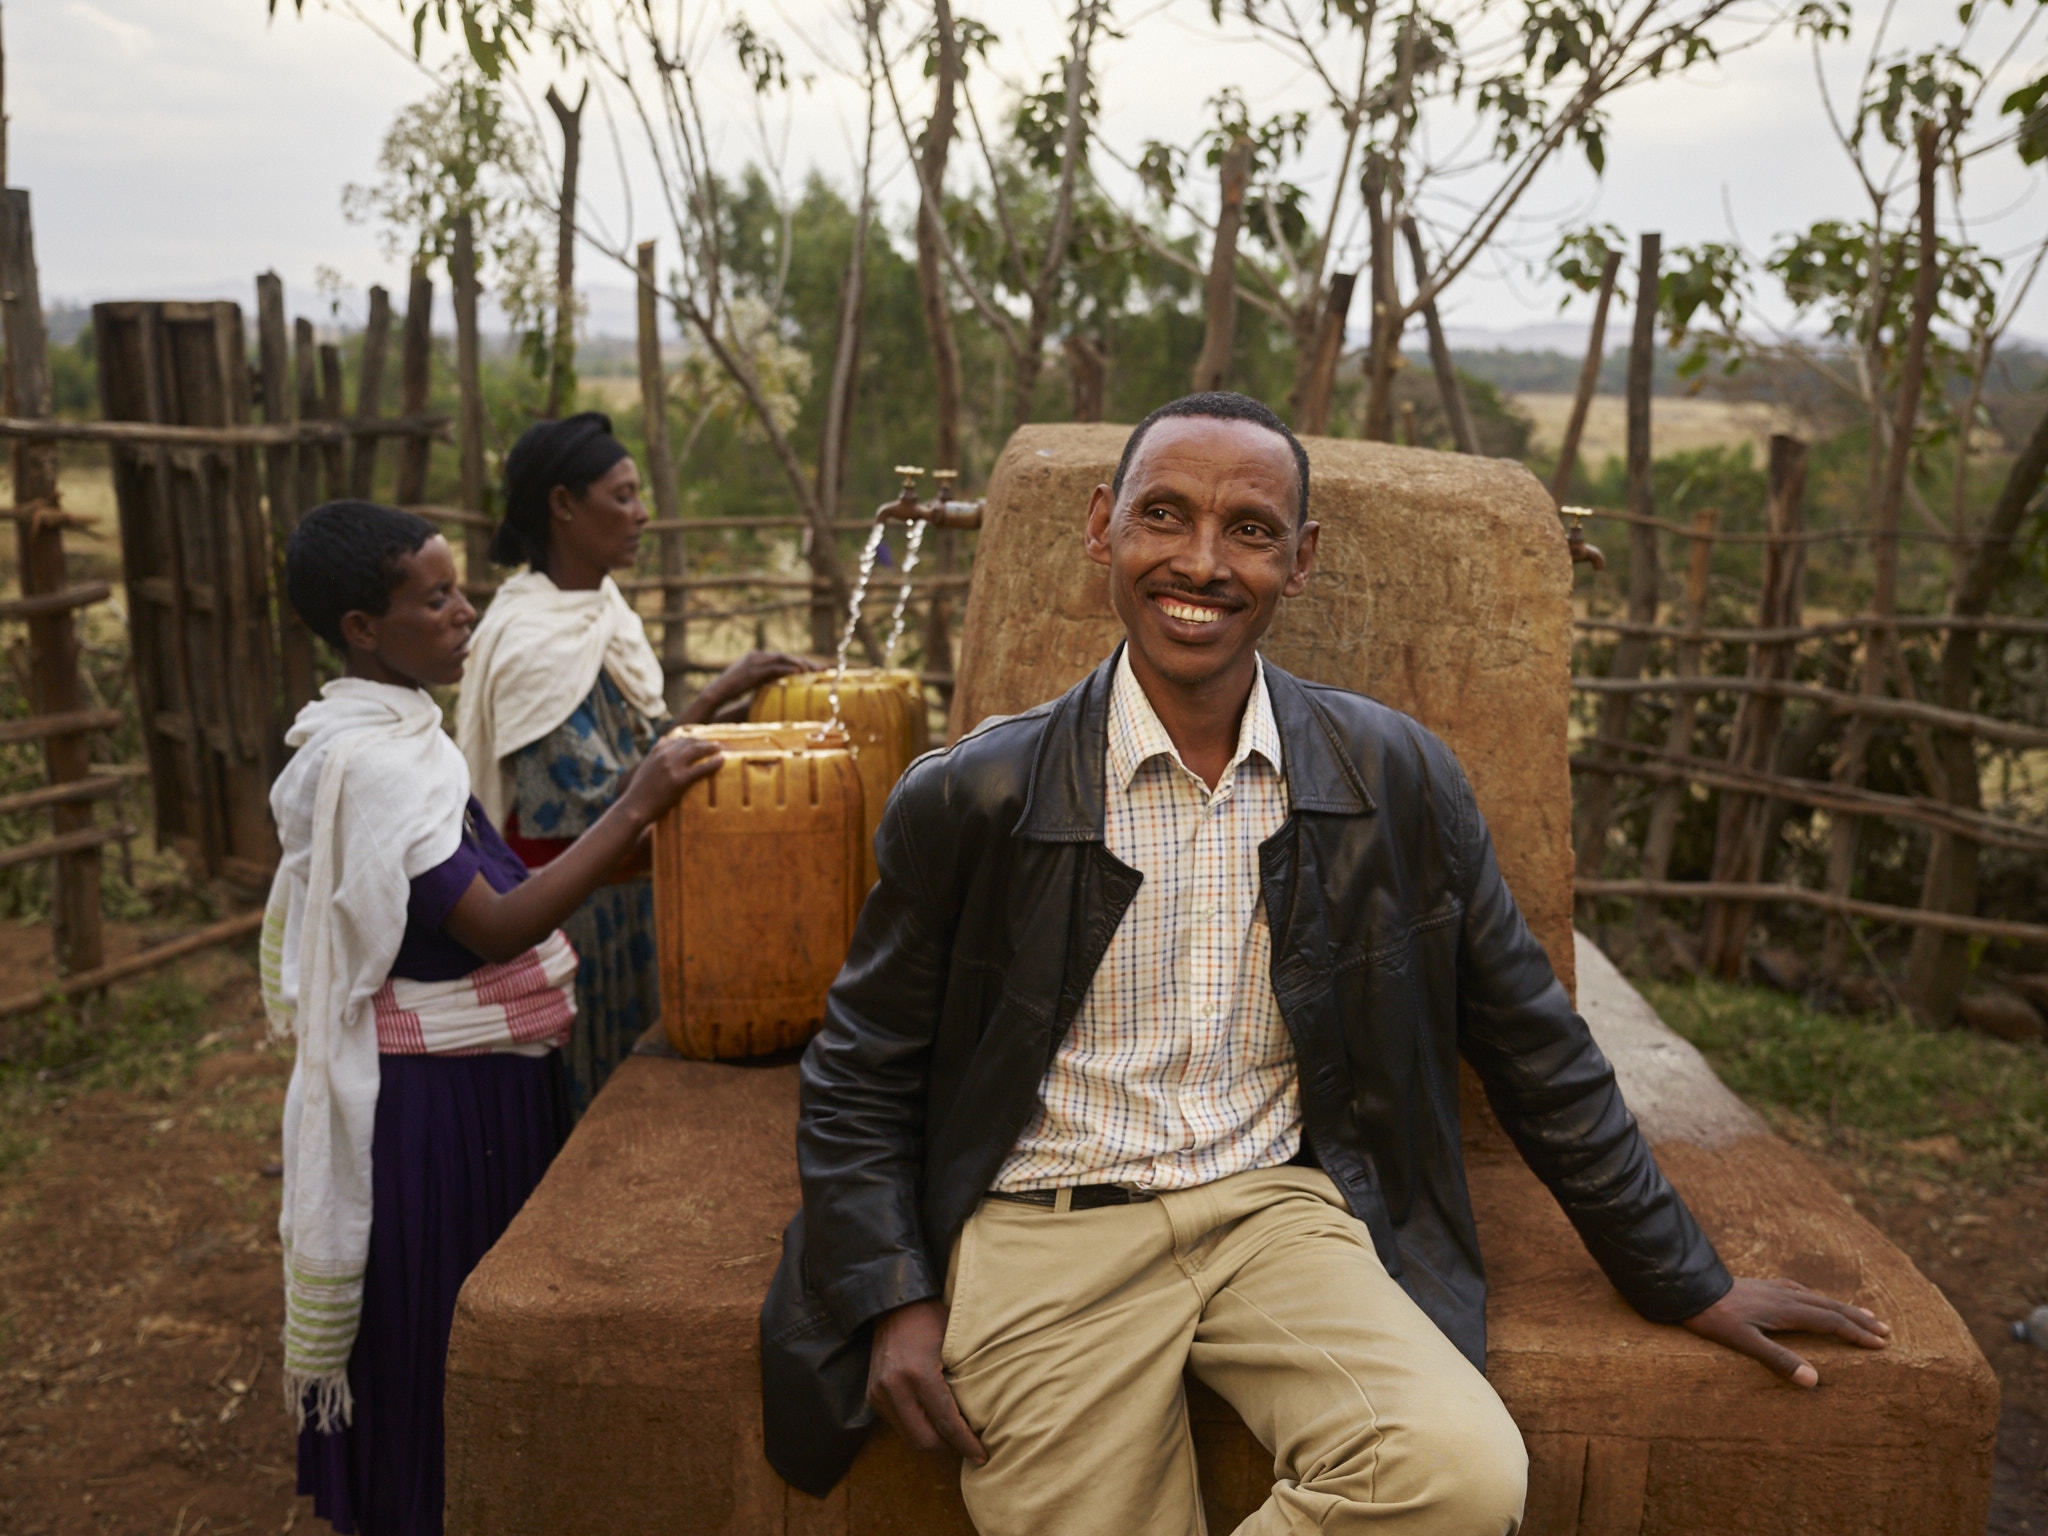 Leyew Animut by the tap stand where the community can collect clean water connected to an underground pipe system in Finote Selam, Ethiopia.